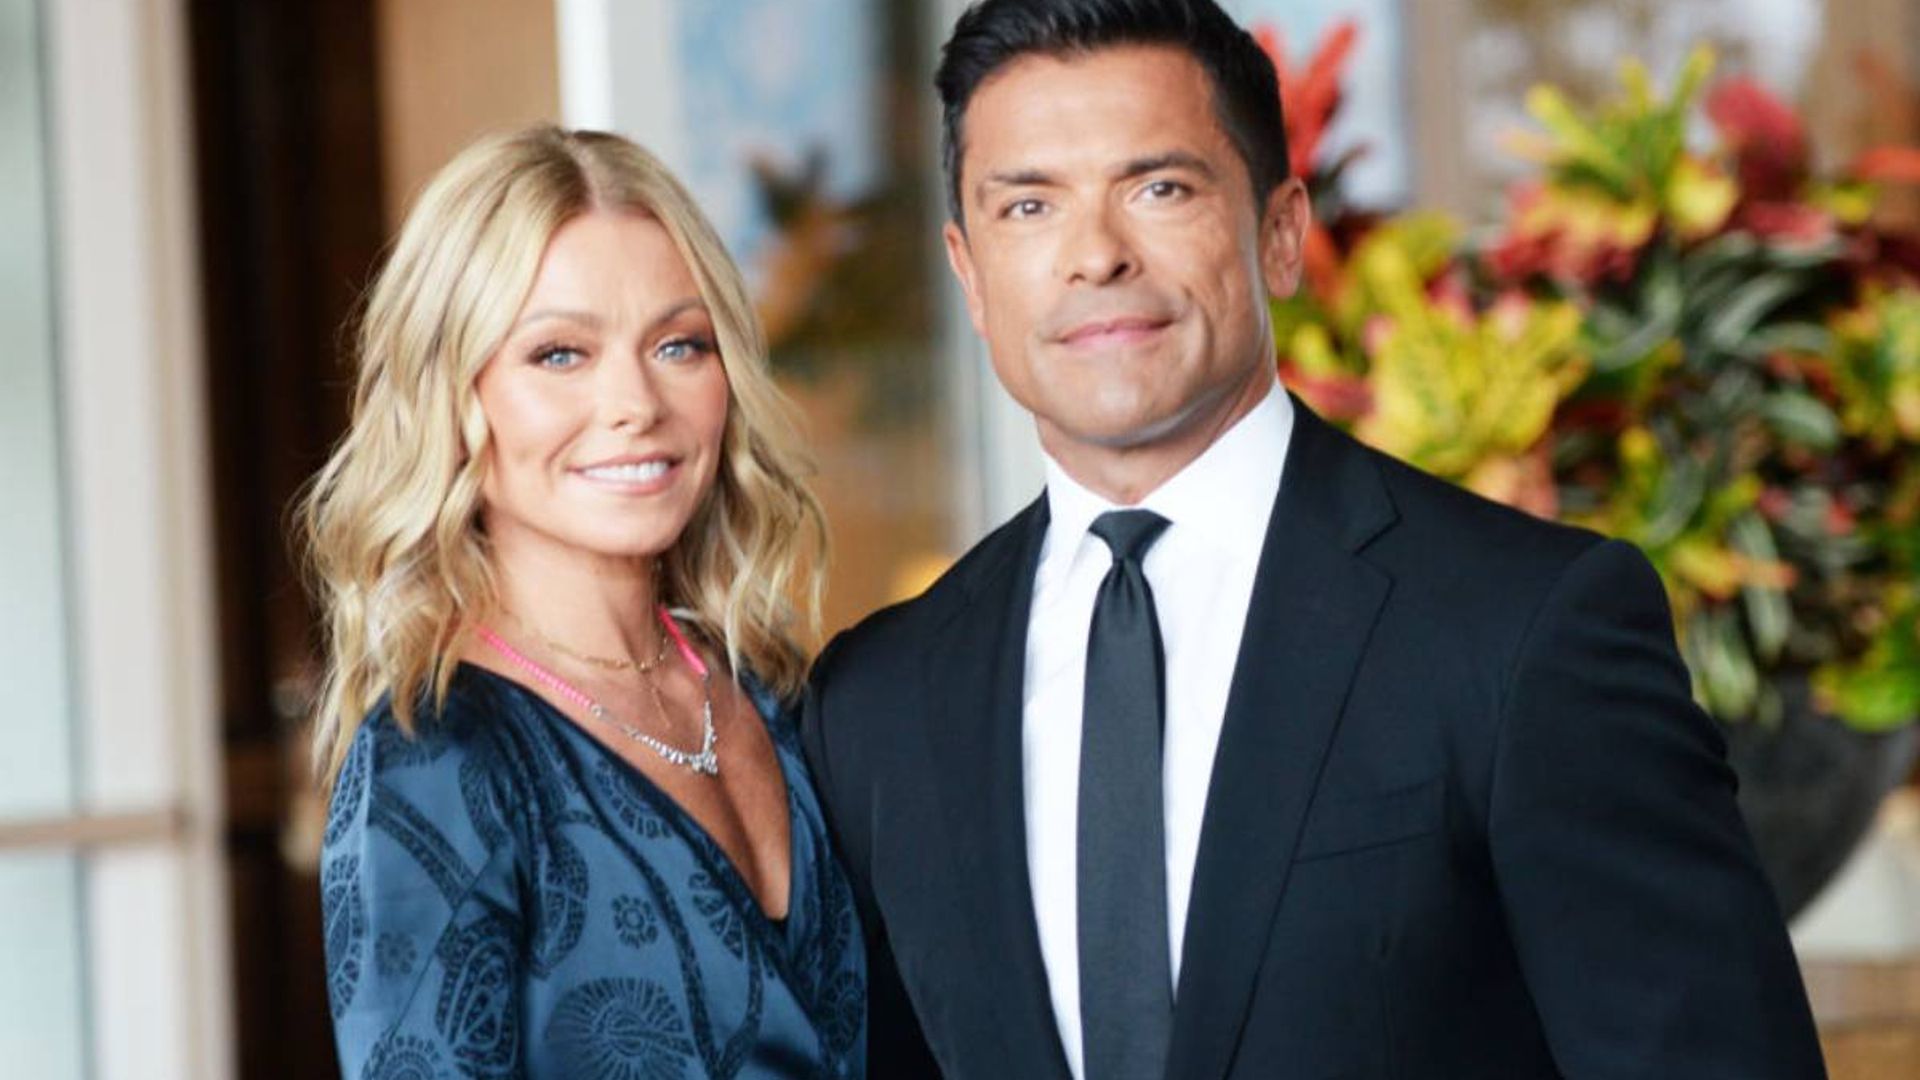 Is this Kelly Ripa's husband Mark Consuelos' new temporary home as he spends time away from wife?